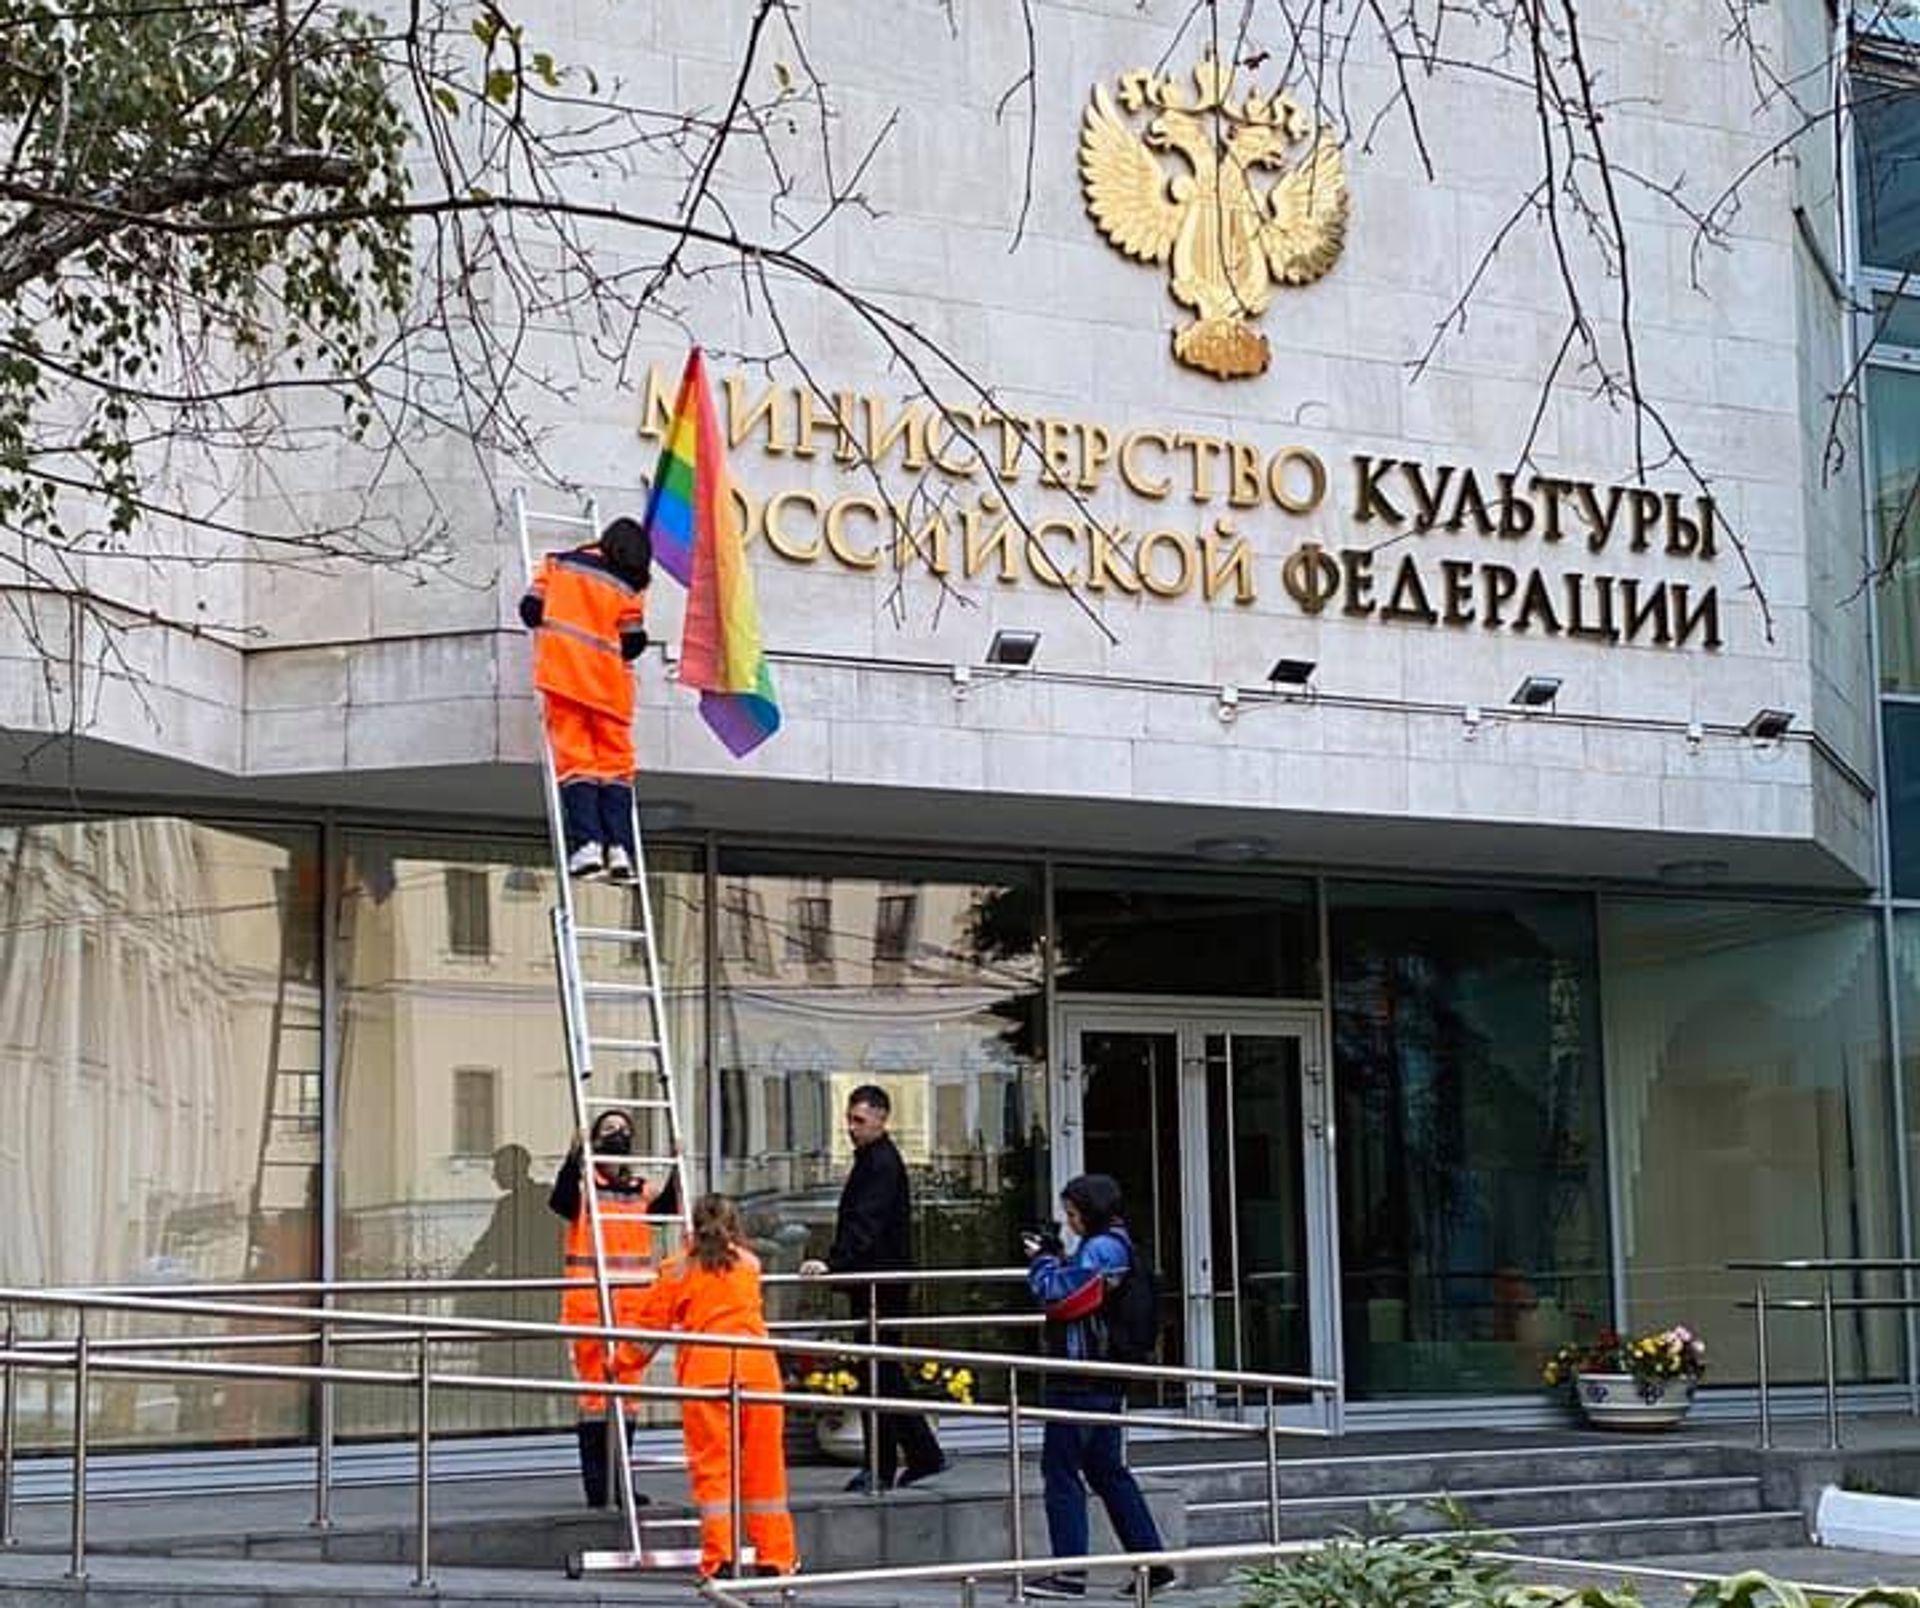 Pussy Riot members hang flags on government buildings in Russia © Pussy Riot